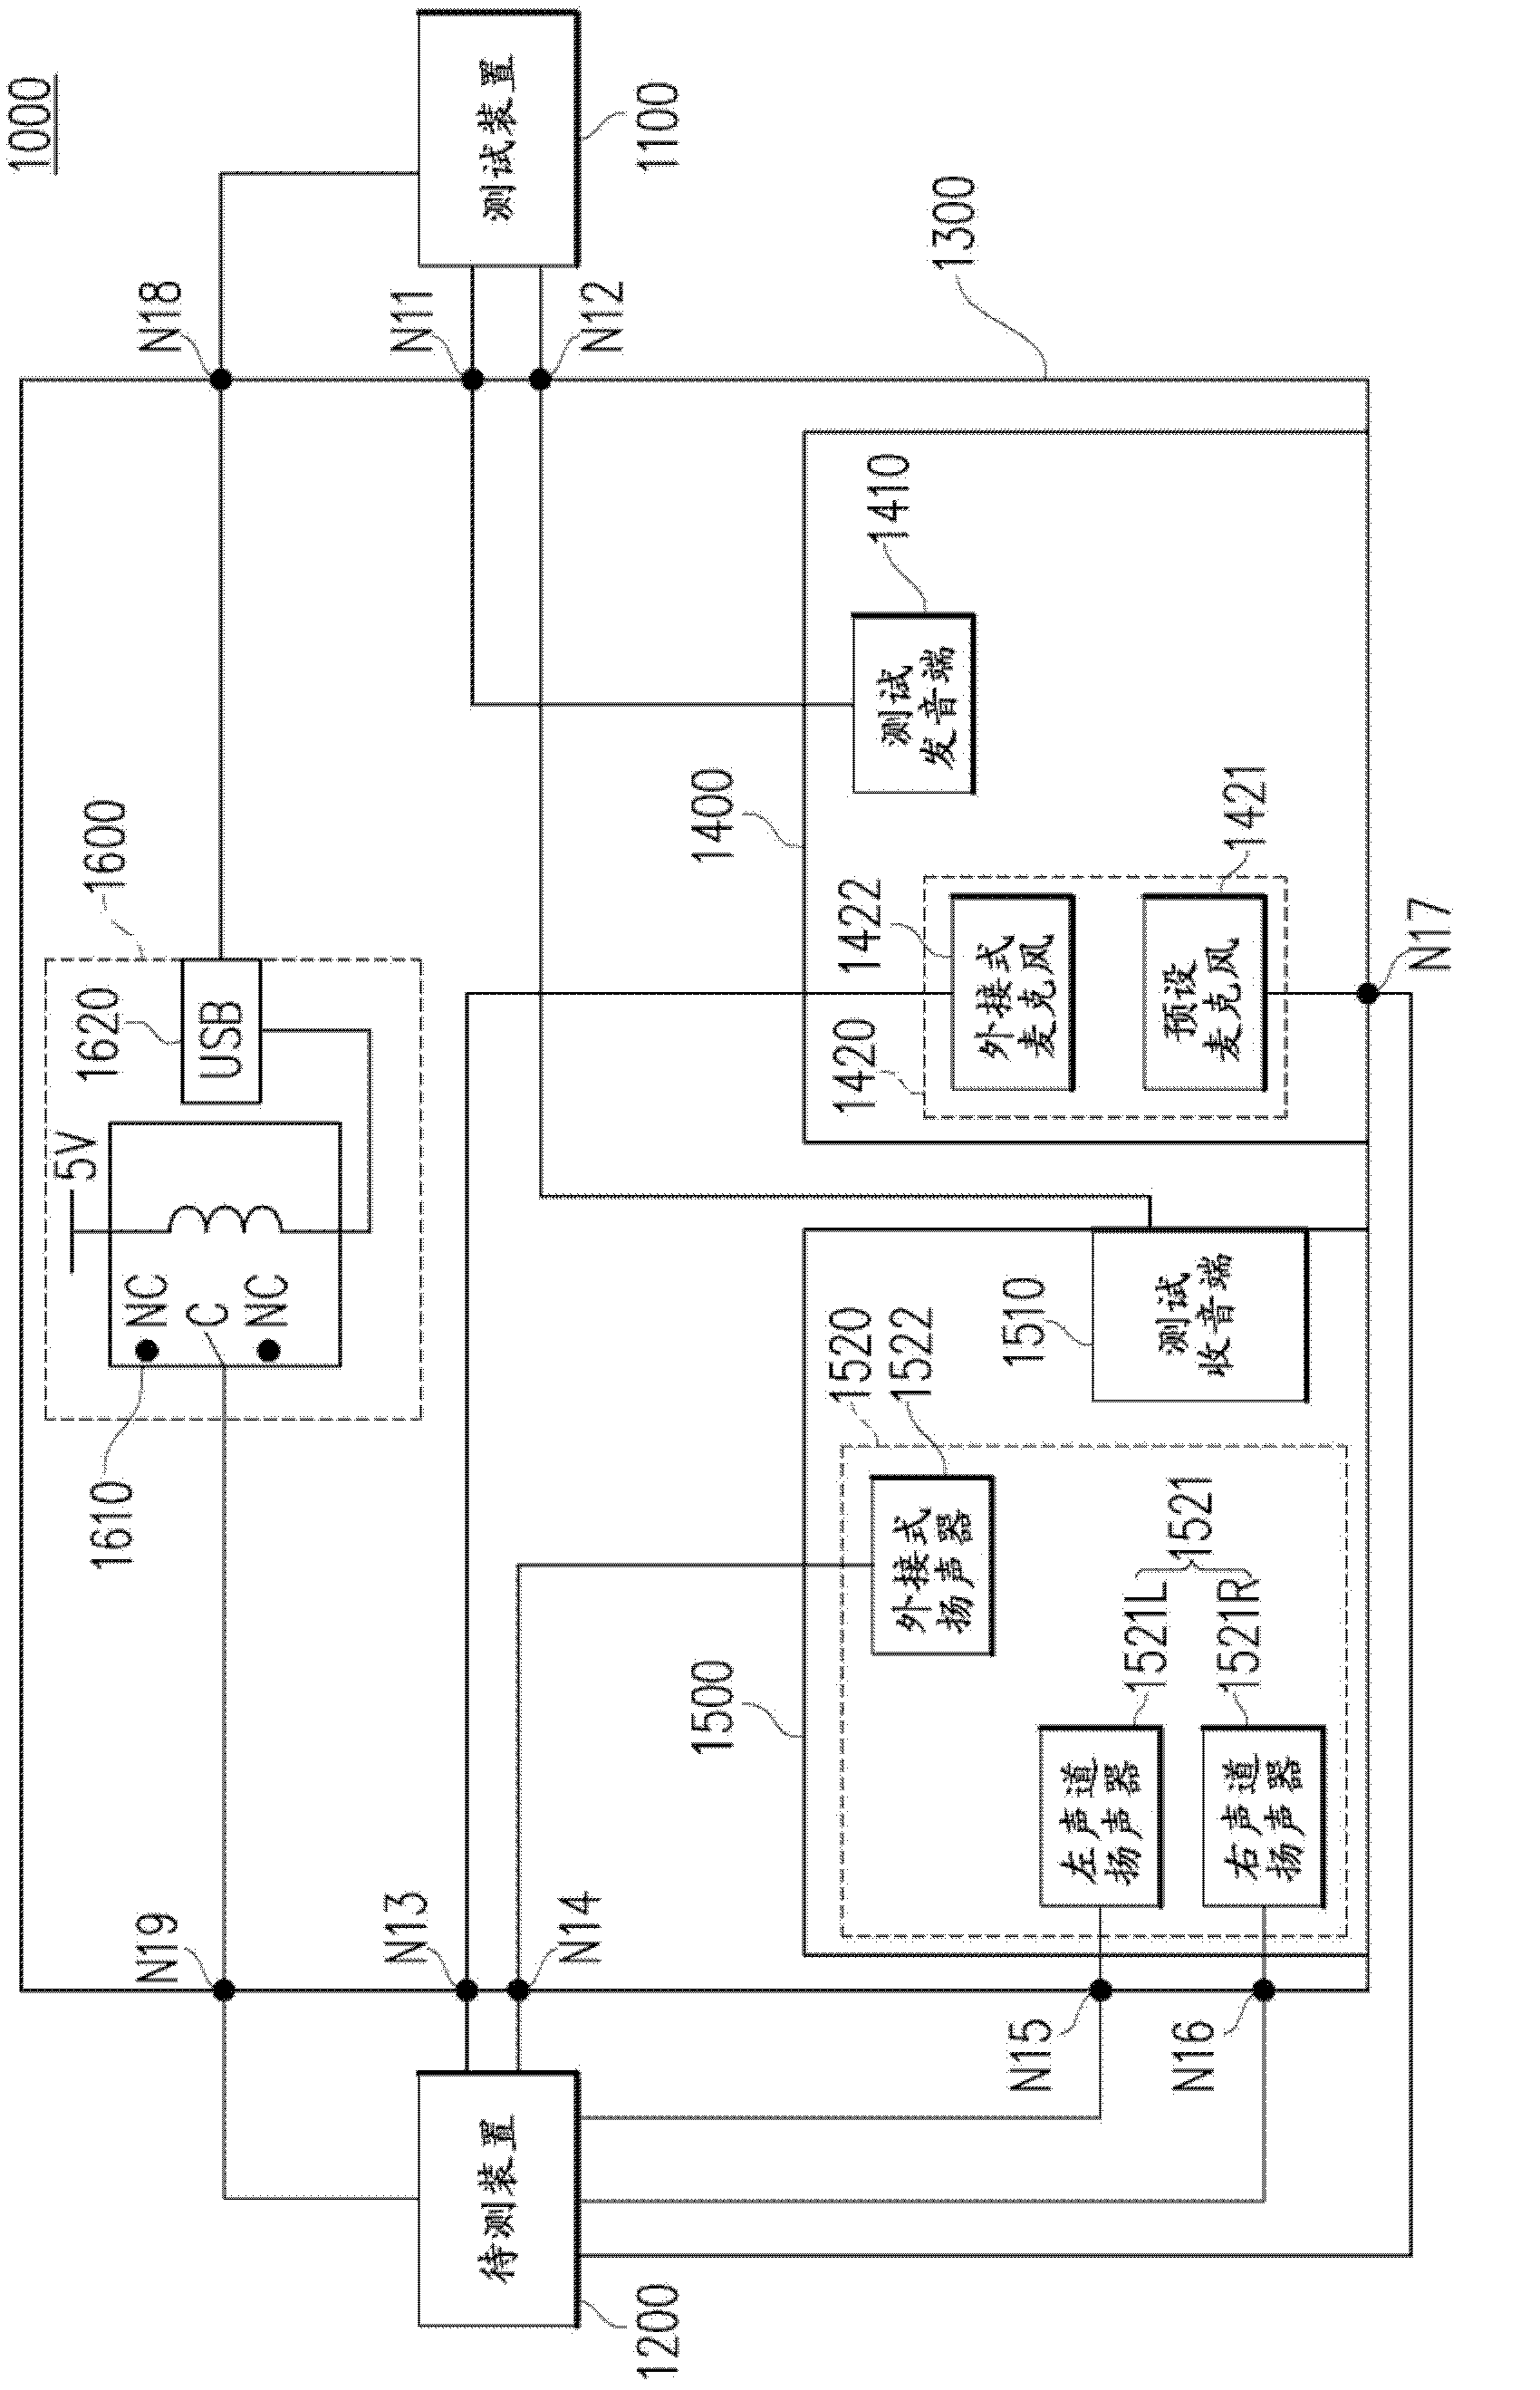 Audio test system and audio test method for to-be-tested device